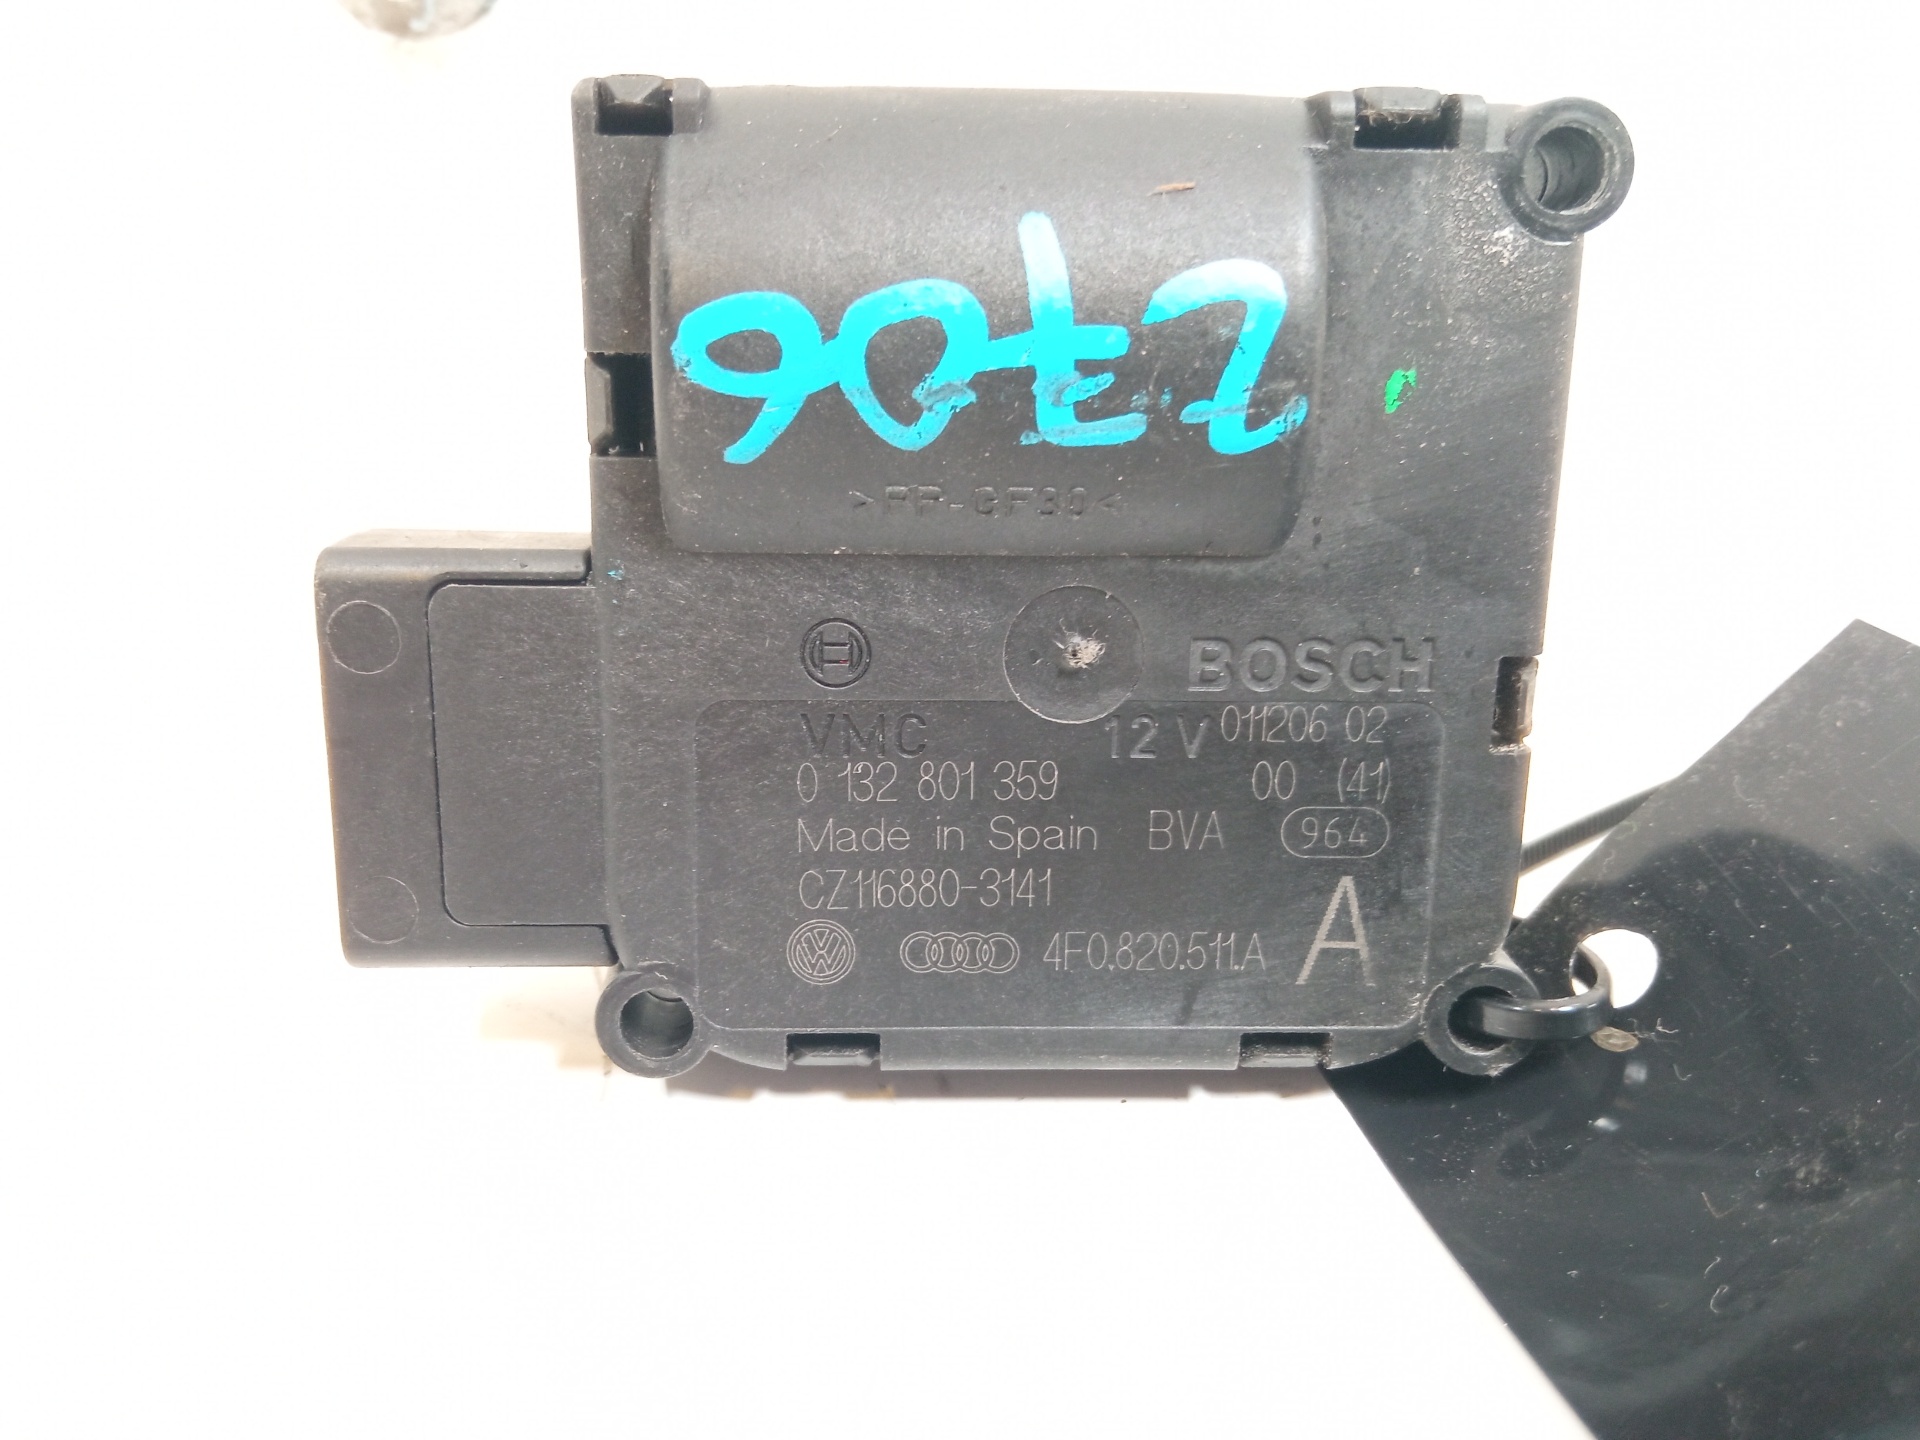 AUDI A6 C6/4F (2004-2011) Air Conditioner Air Flow Valve Motor 4F0820511A, 5PINES 24959137